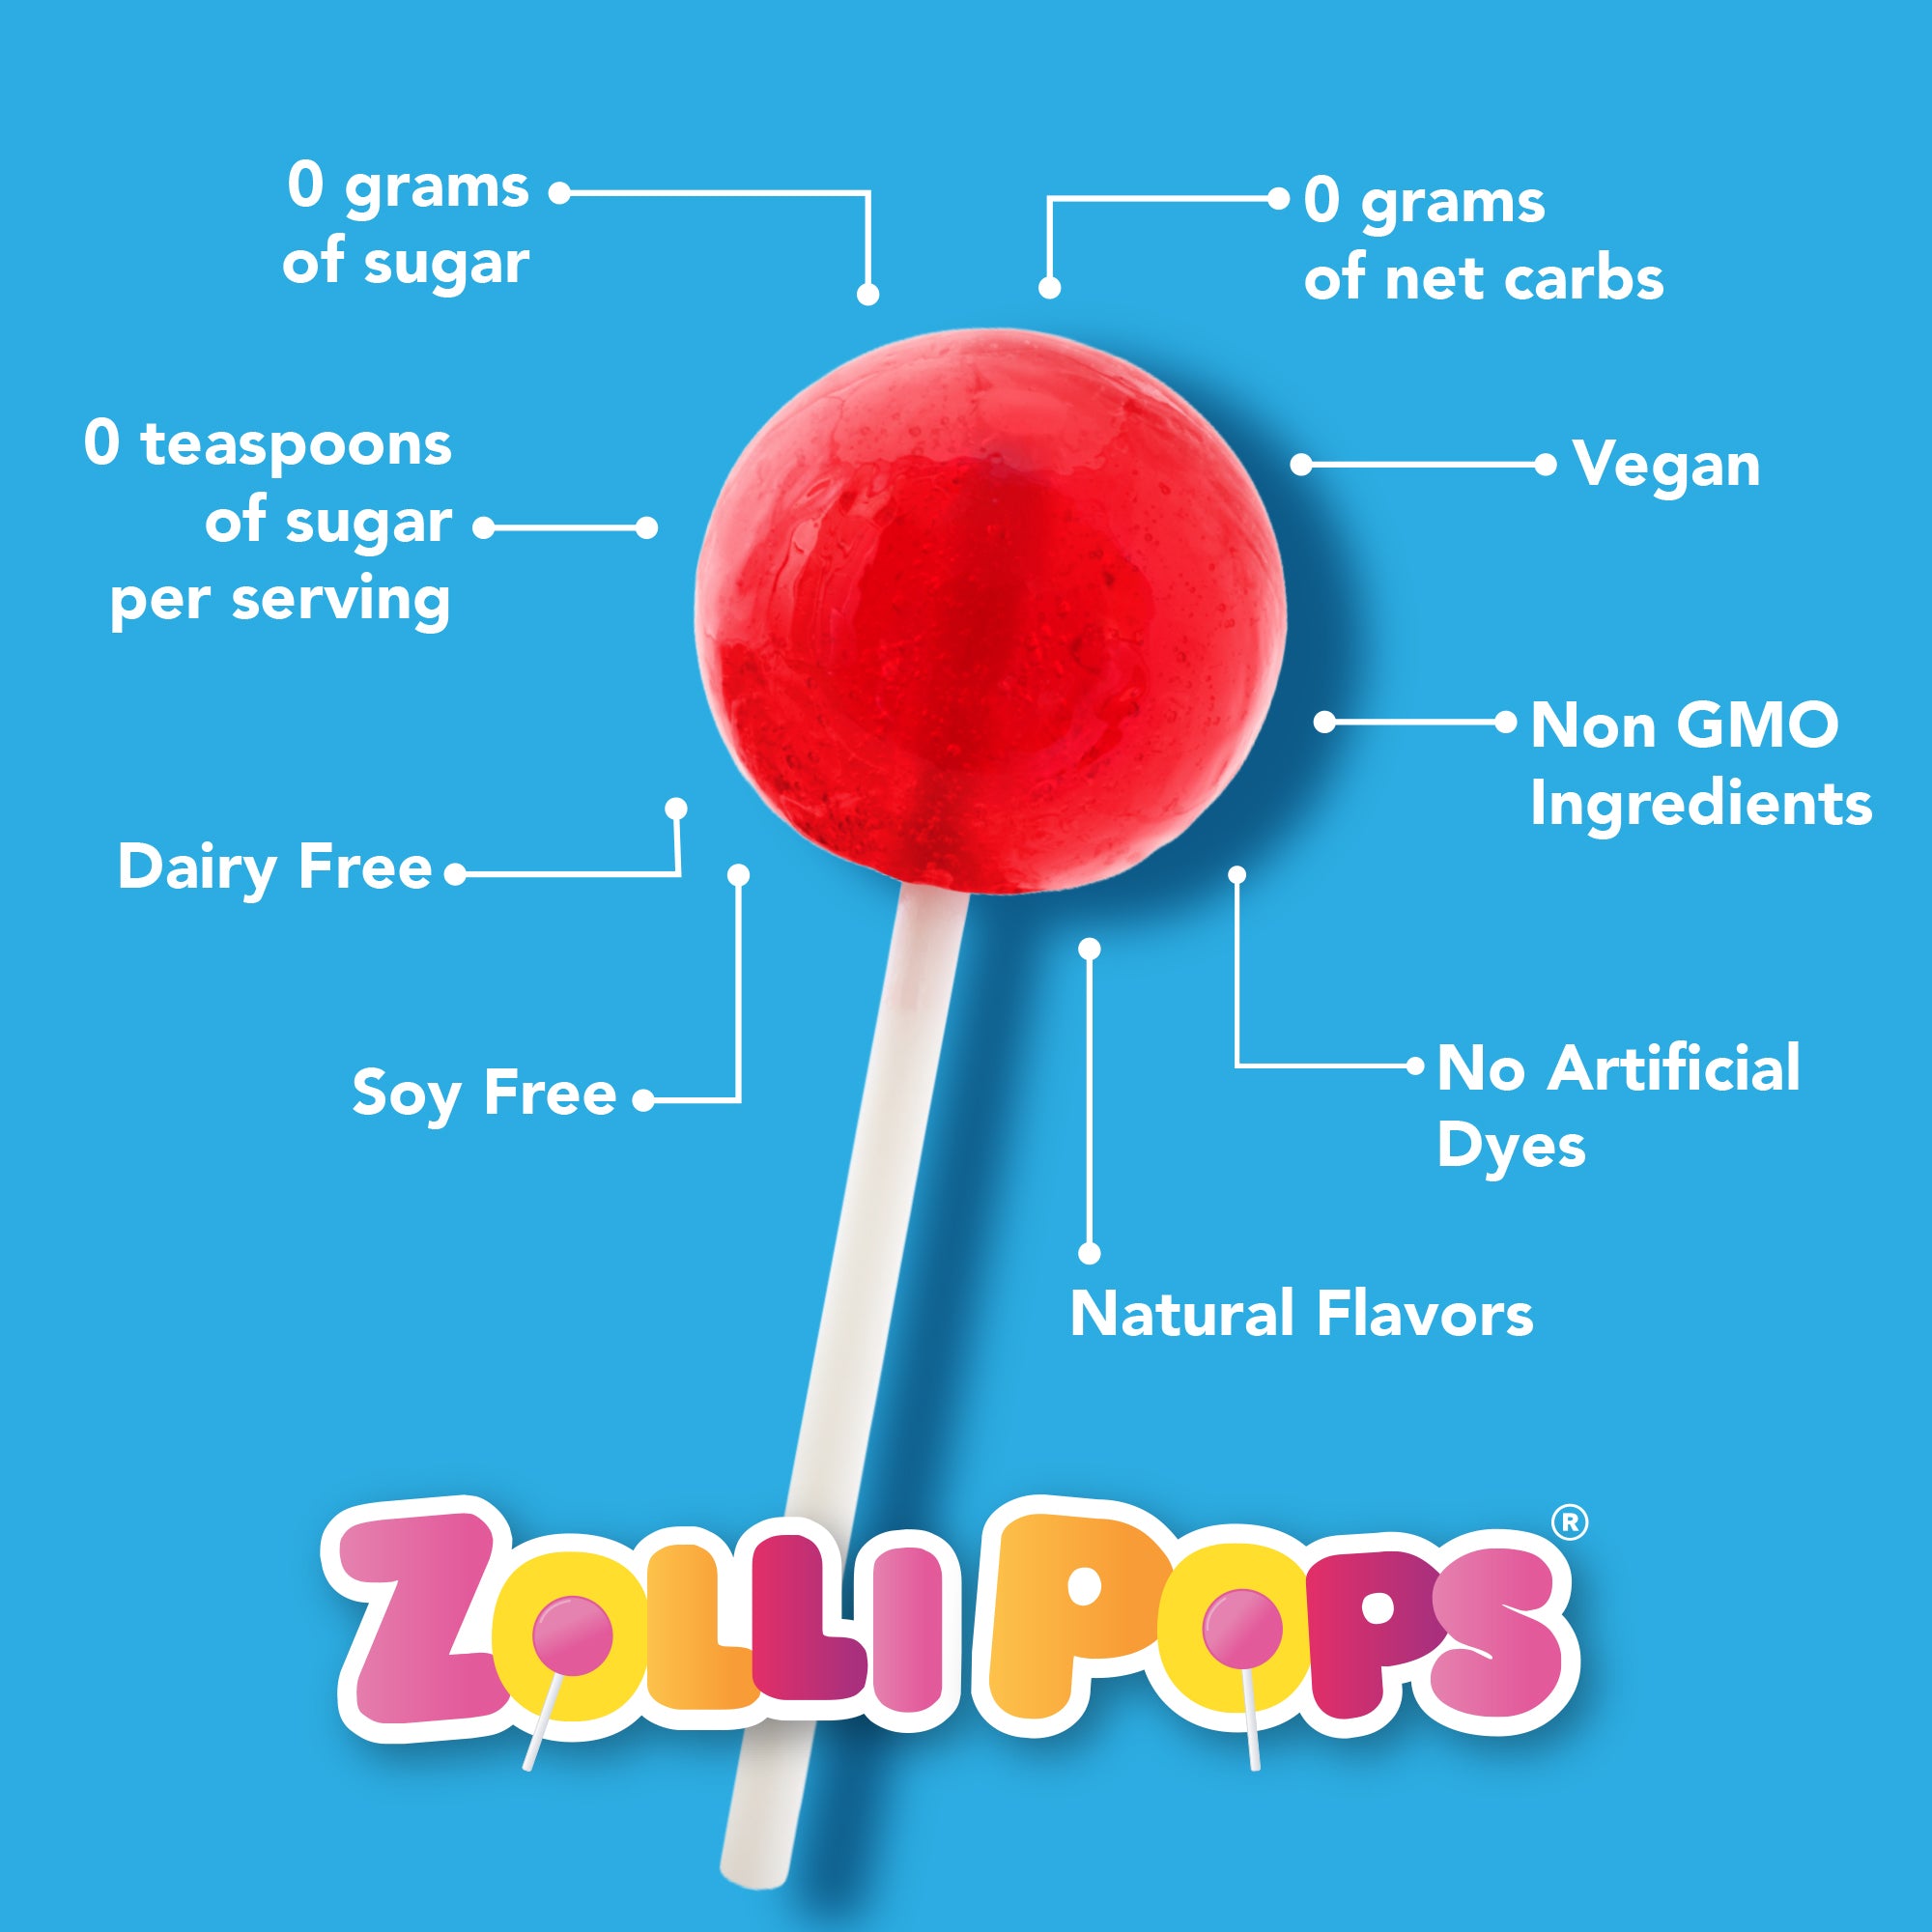 Our lollipops have 0 grams of sugar, are dairy free, soy free, gluten free, vegan, kosher, non-gmo, no artificial dyes, all natural flavors, and 0 grams of net carbs.